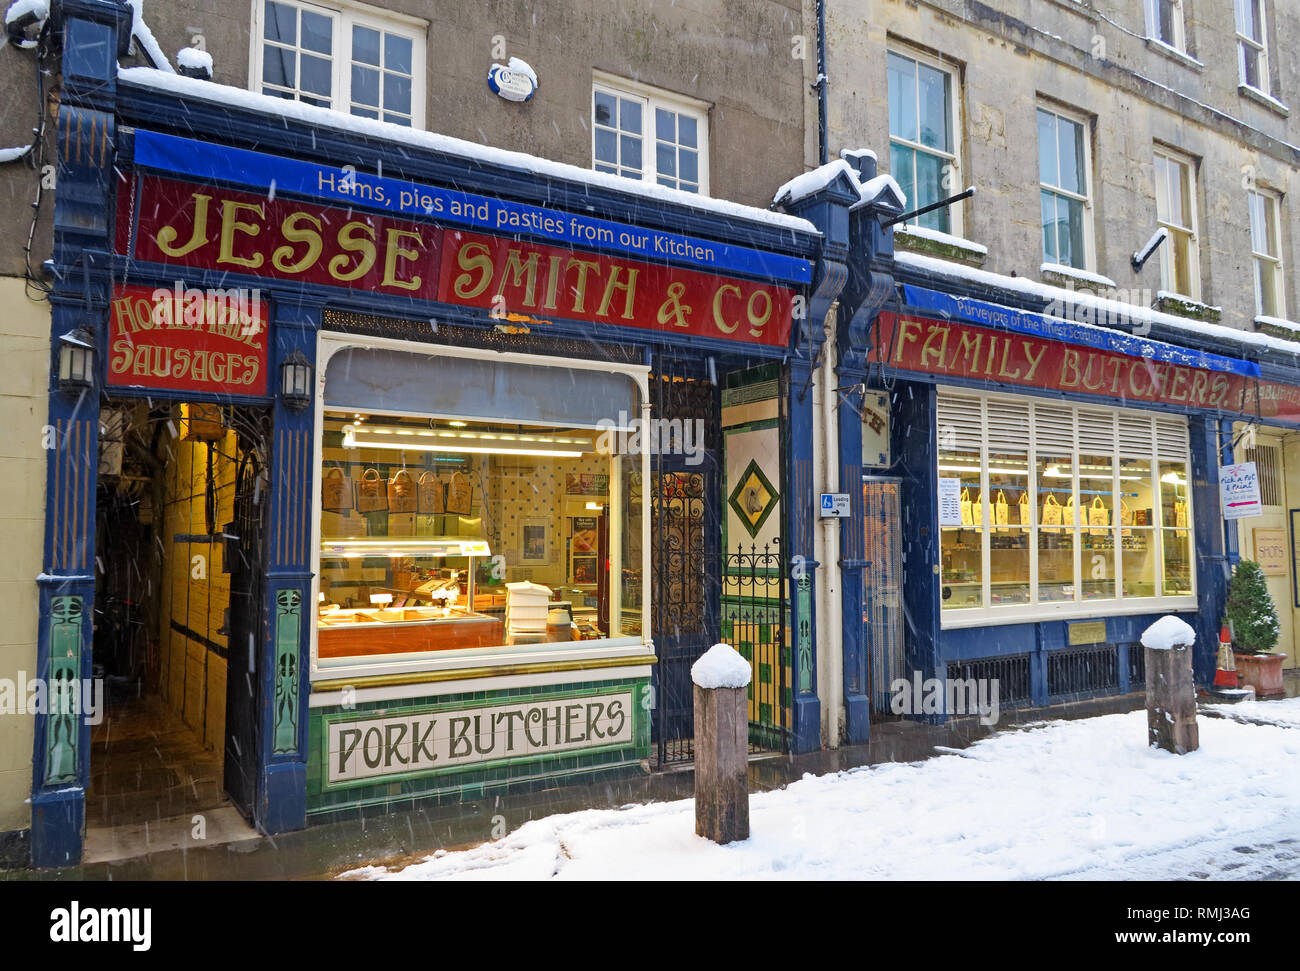 Neve invernale Cirencester Town Center, Jesse Smith Norcineria, 14 Black Jack Street, Gloucestershire, South West England, Regno Unito Foto Stock